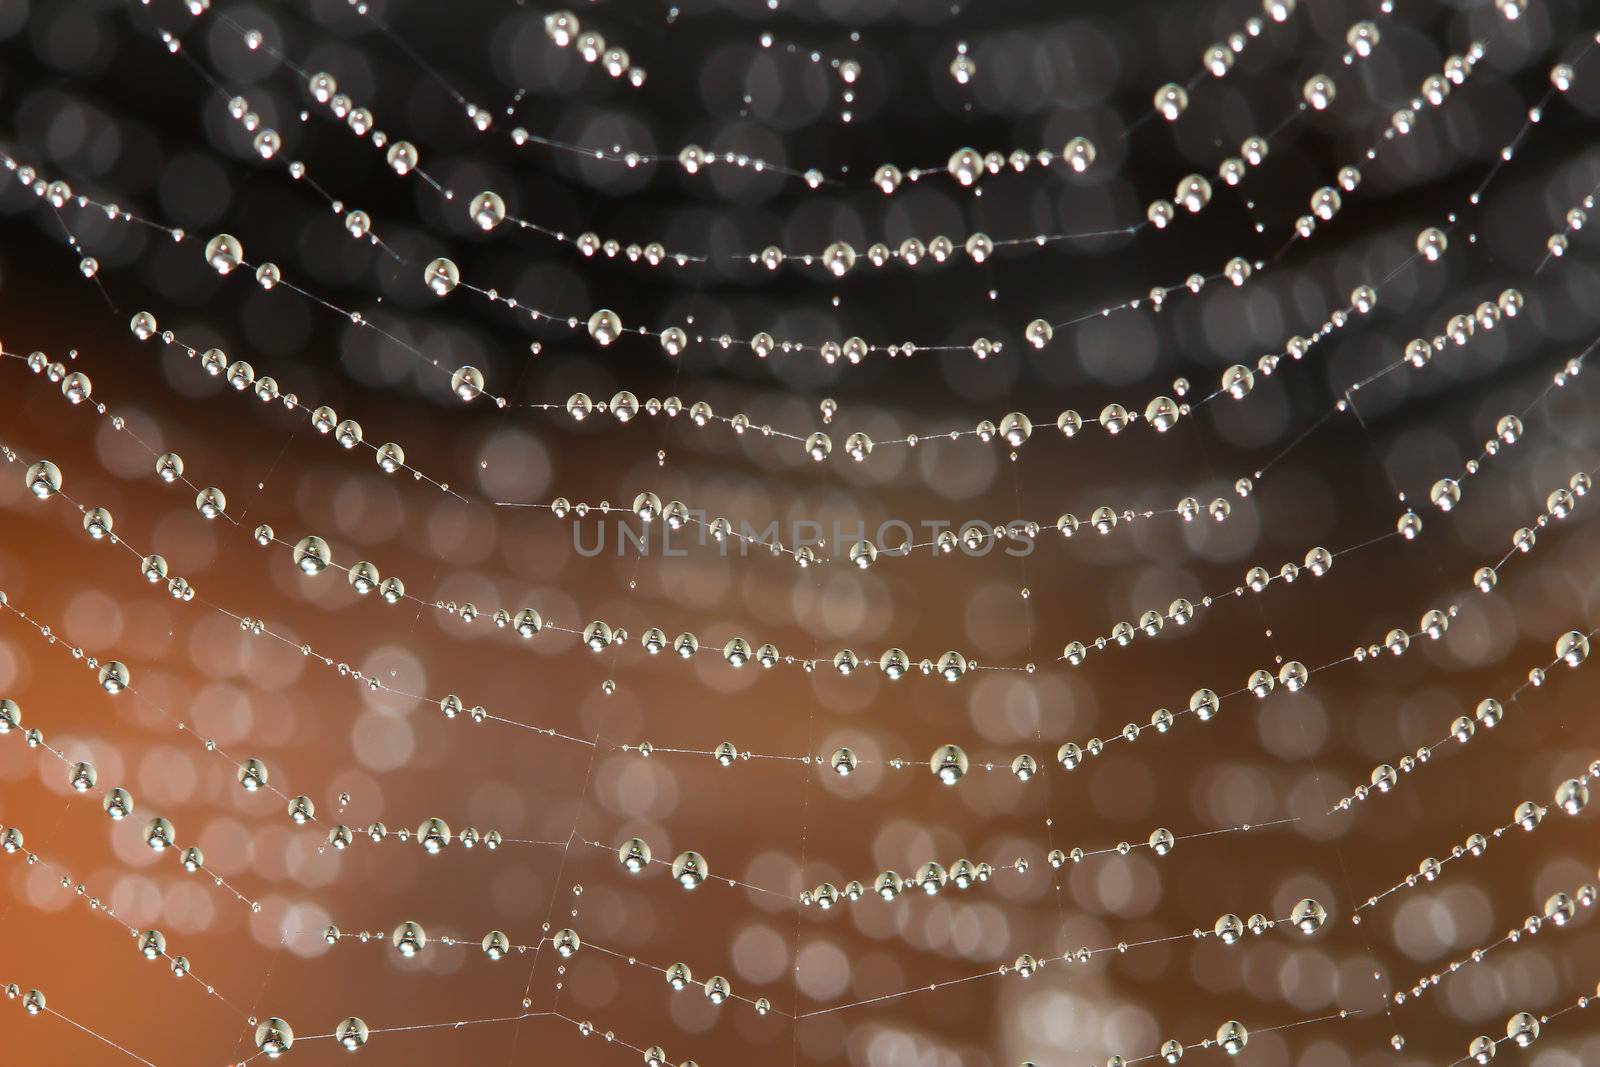 Spider Web Covered with Sparkling Dew Drops by bajita111122